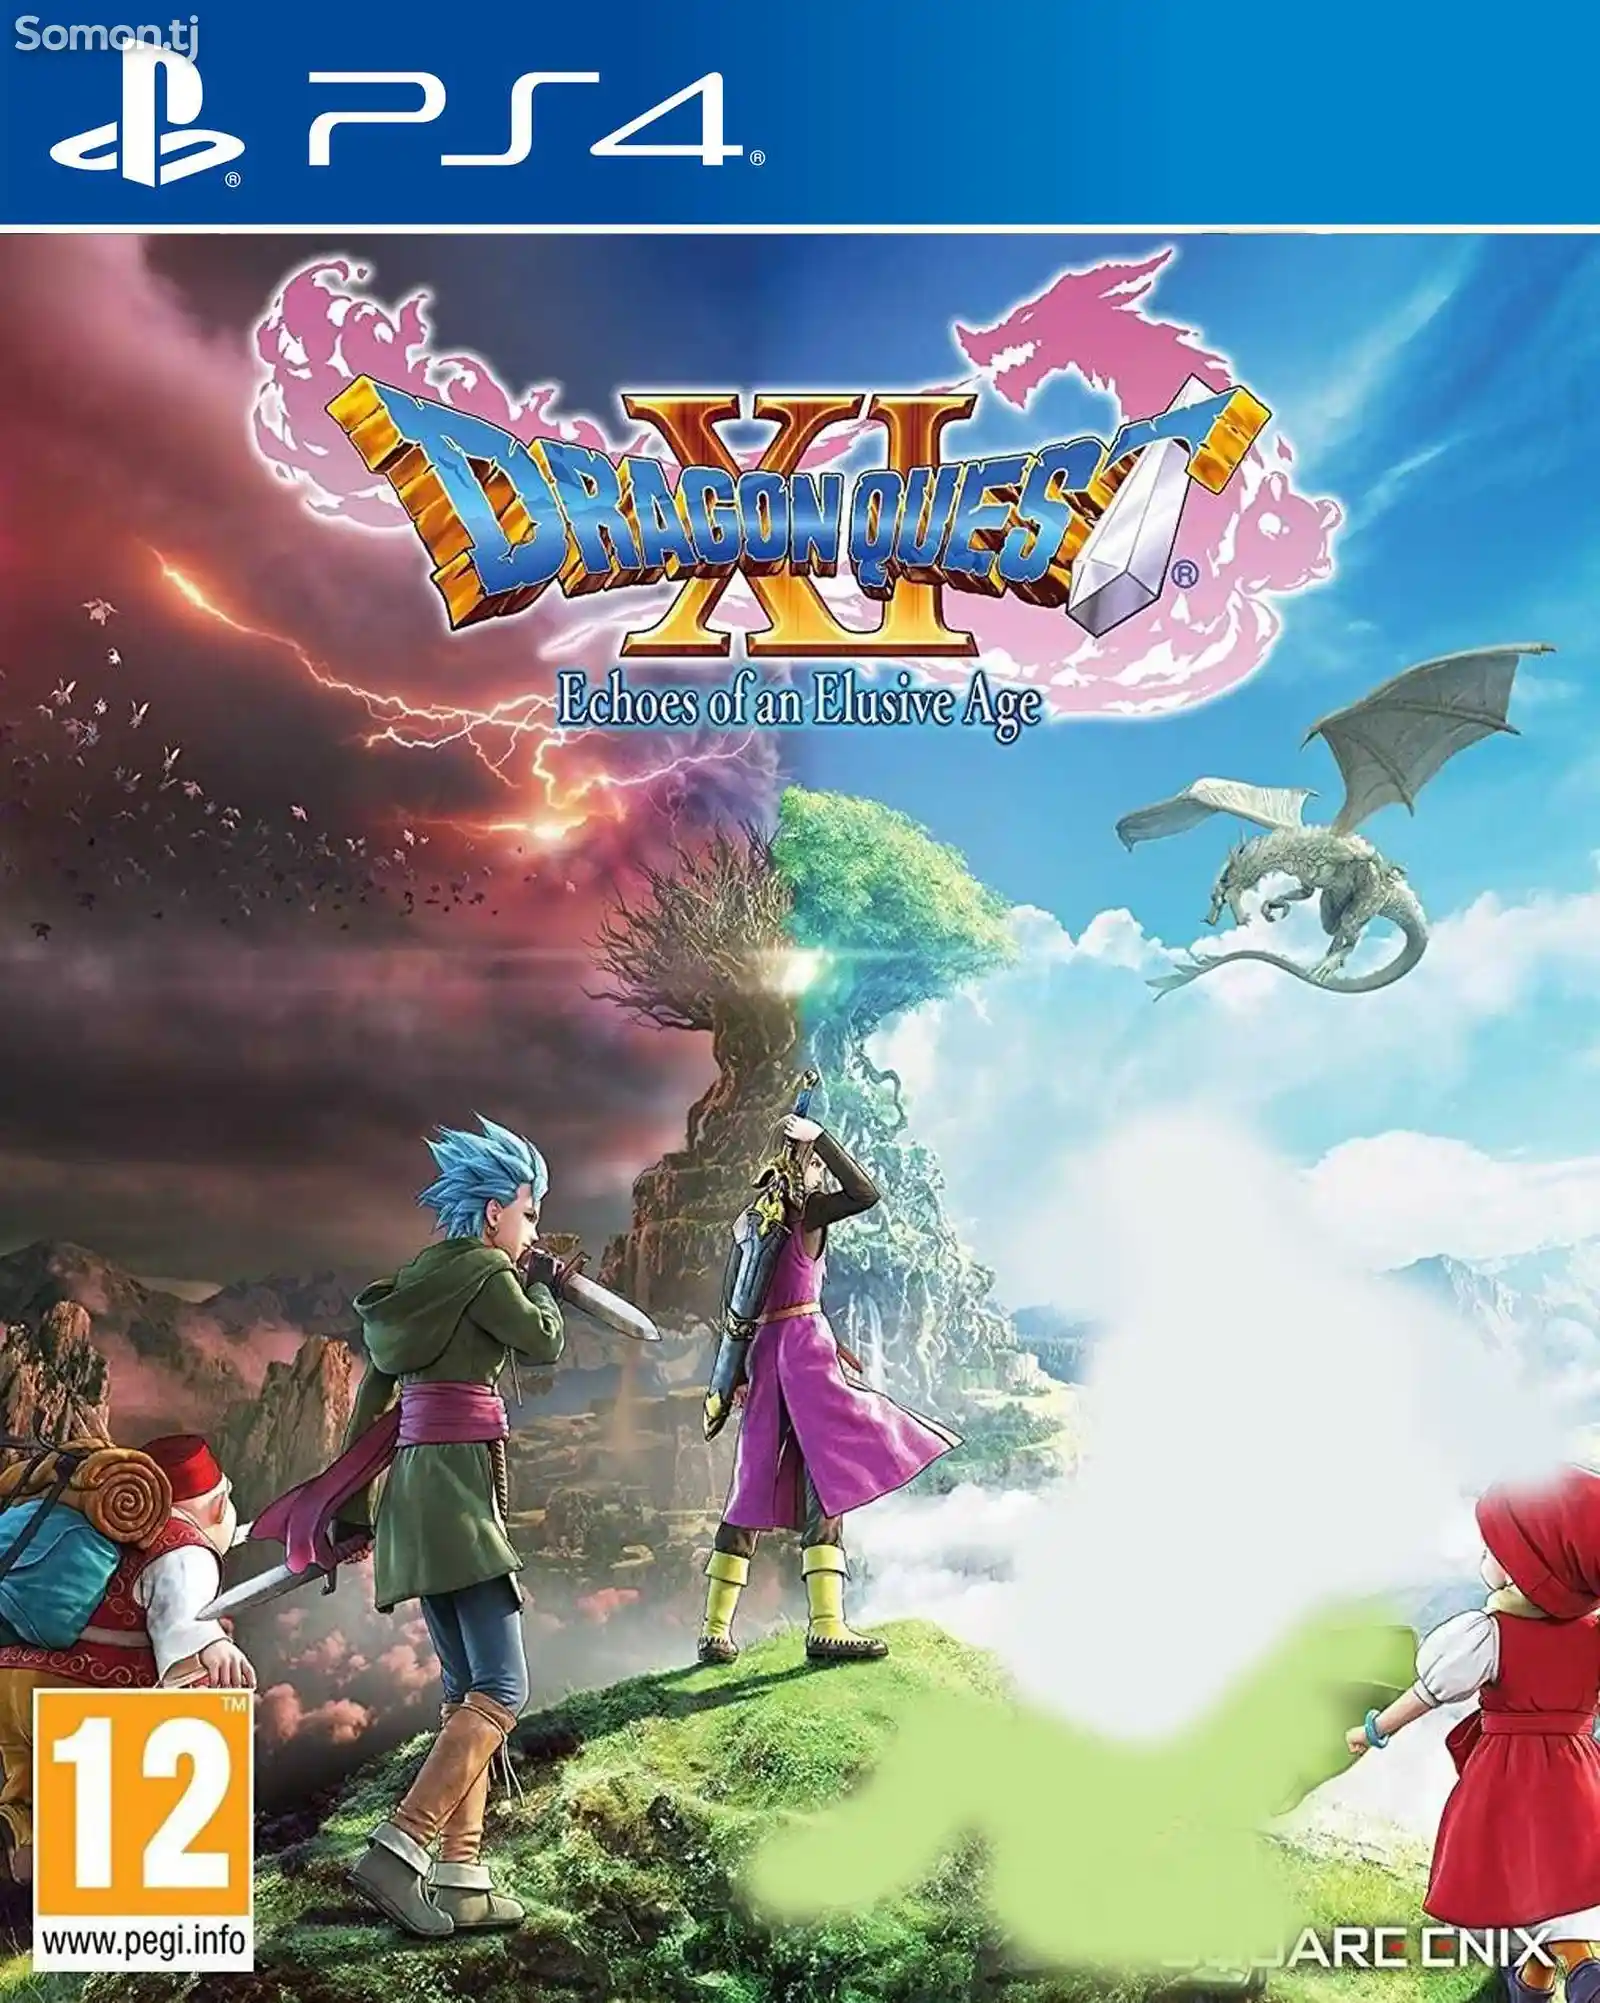 Игра Dragon quest xi echoes of an elusive age для PS-4 / 5.05 / 6.72 / 9.00 /-1